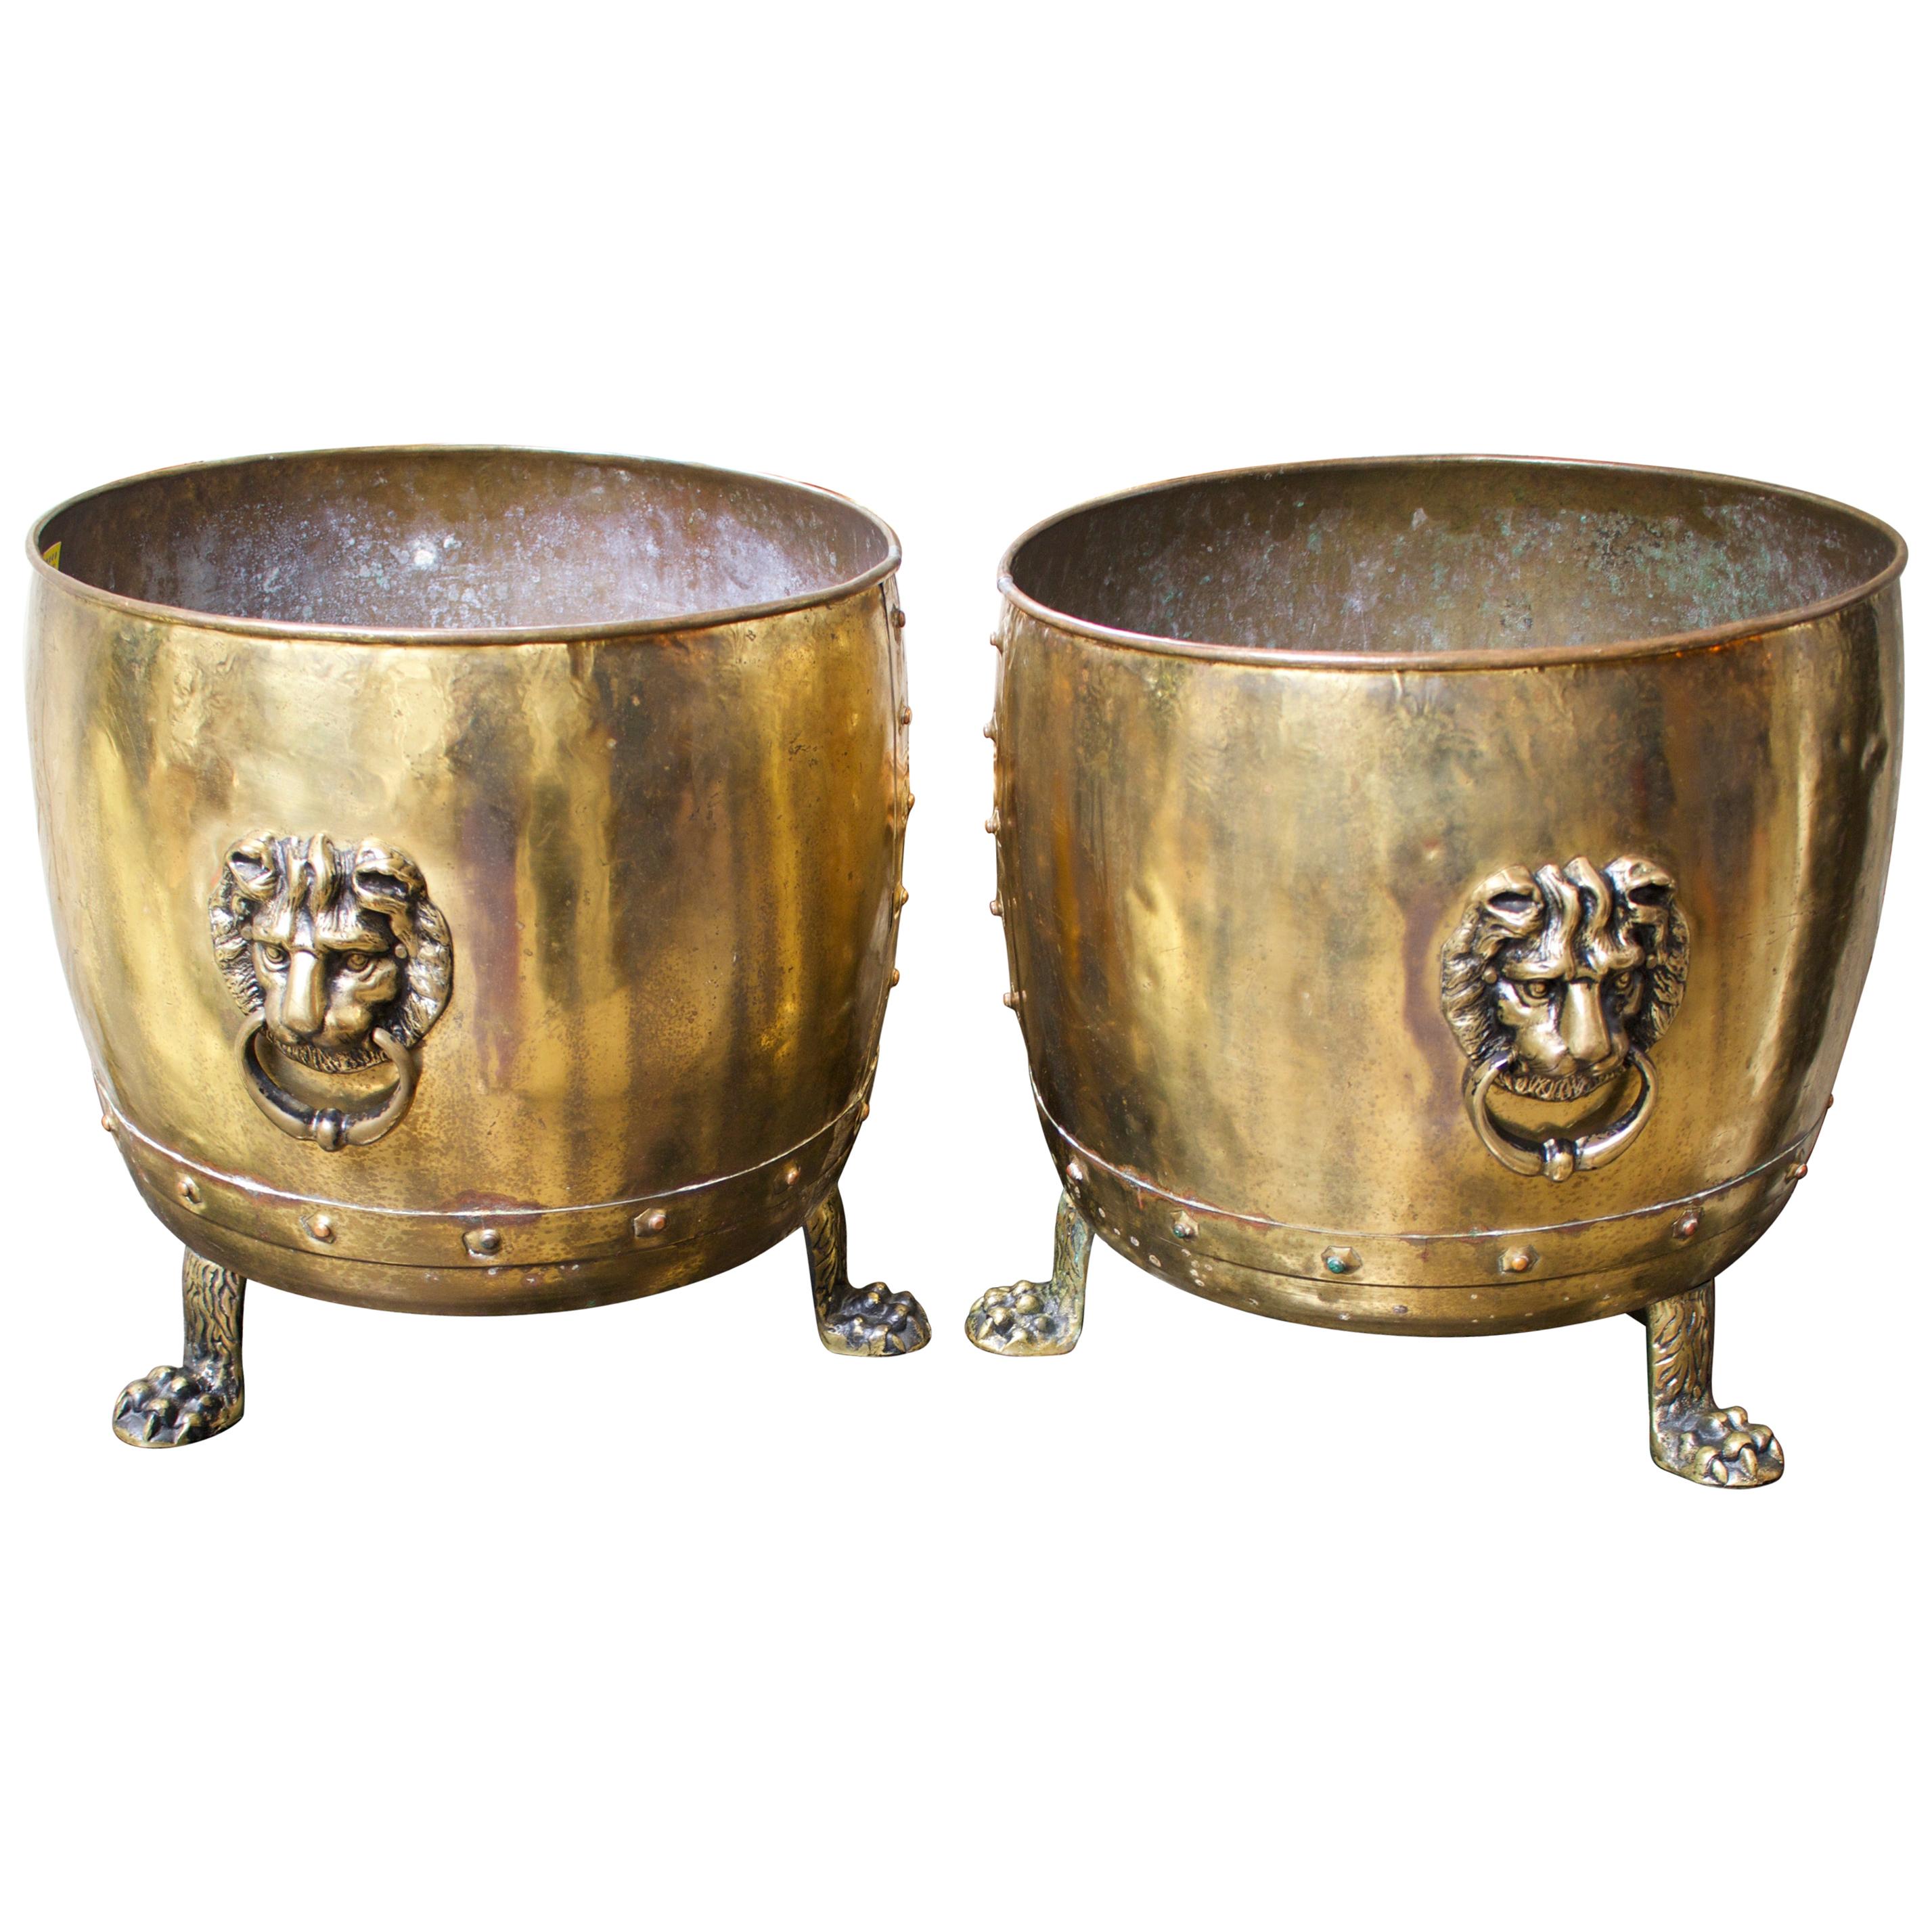 Pair of 19th Century English Brass Planters with Lion Handles